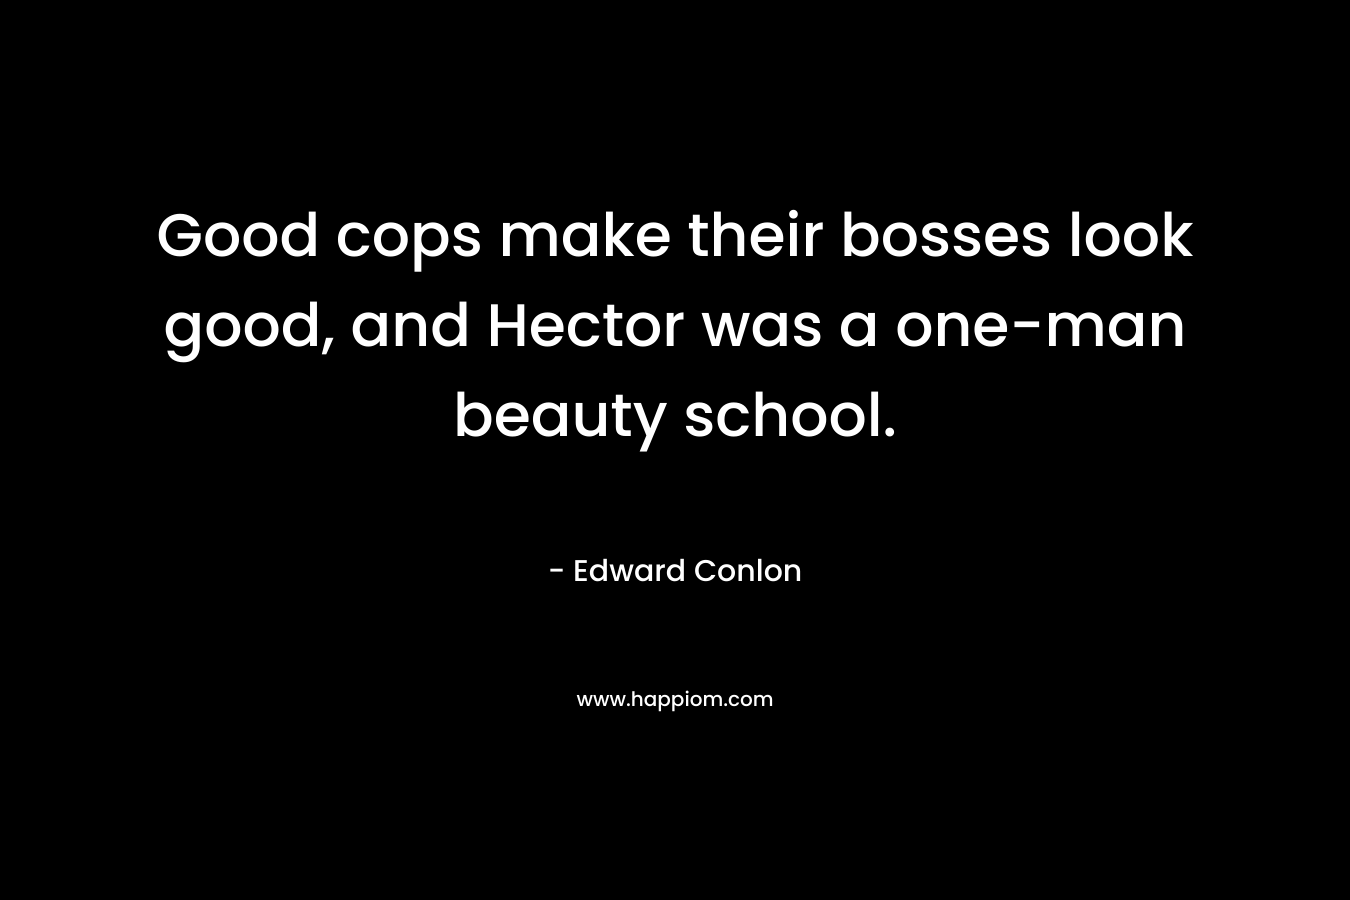 Good cops make their bosses look good, and Hector was a one-man beauty school.